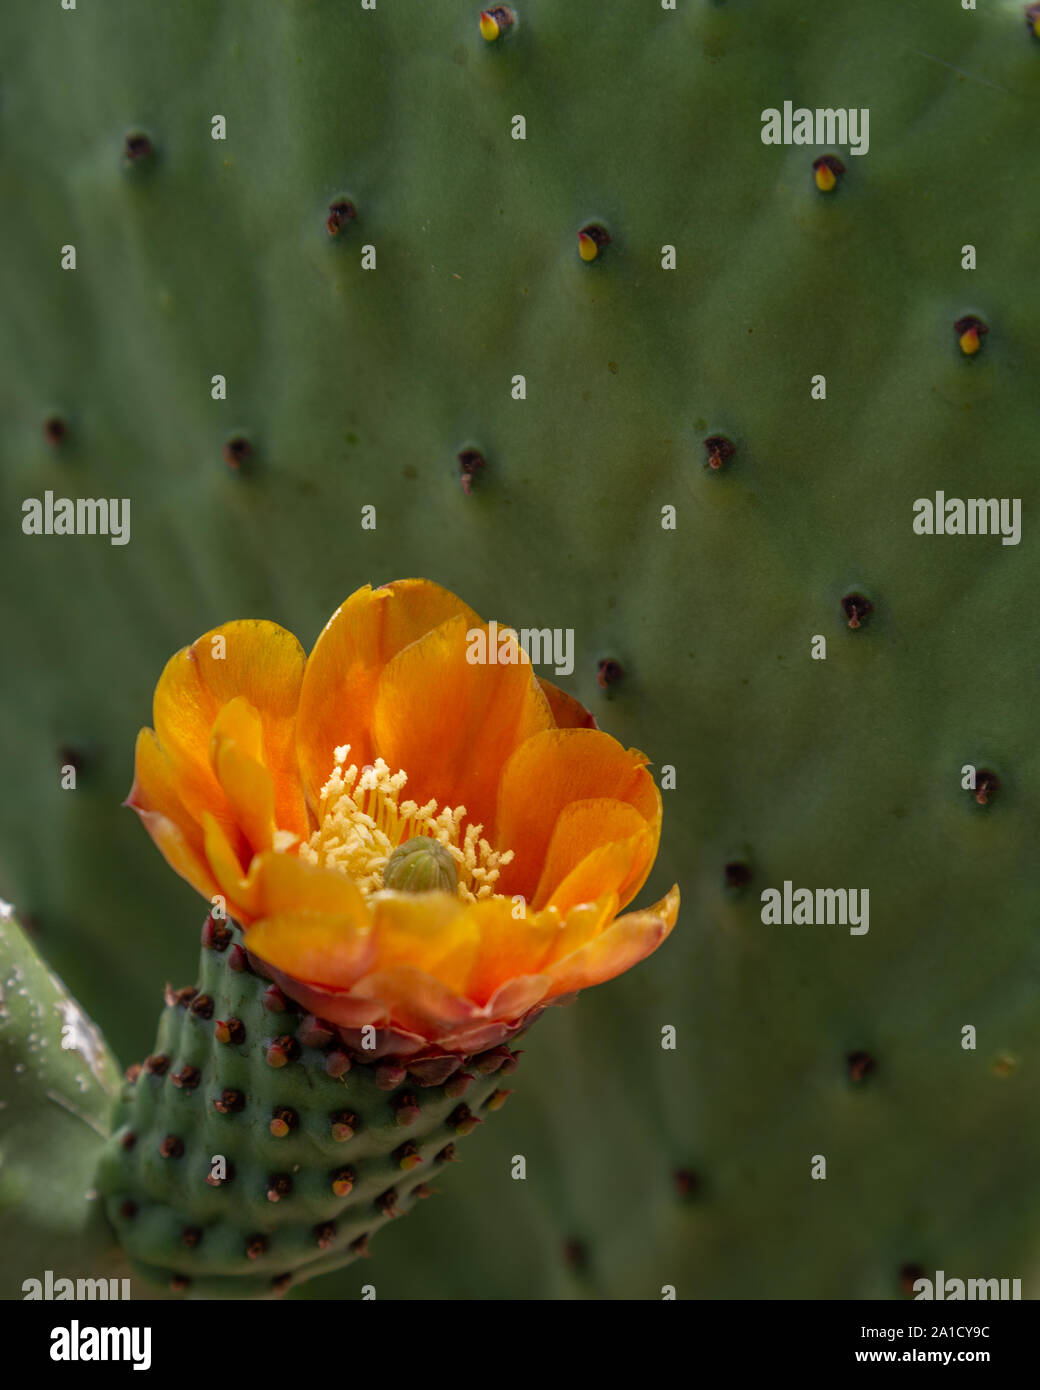 A solitary peach colored prickly pear blossom with a nopal (leaf) background. Stock Photo